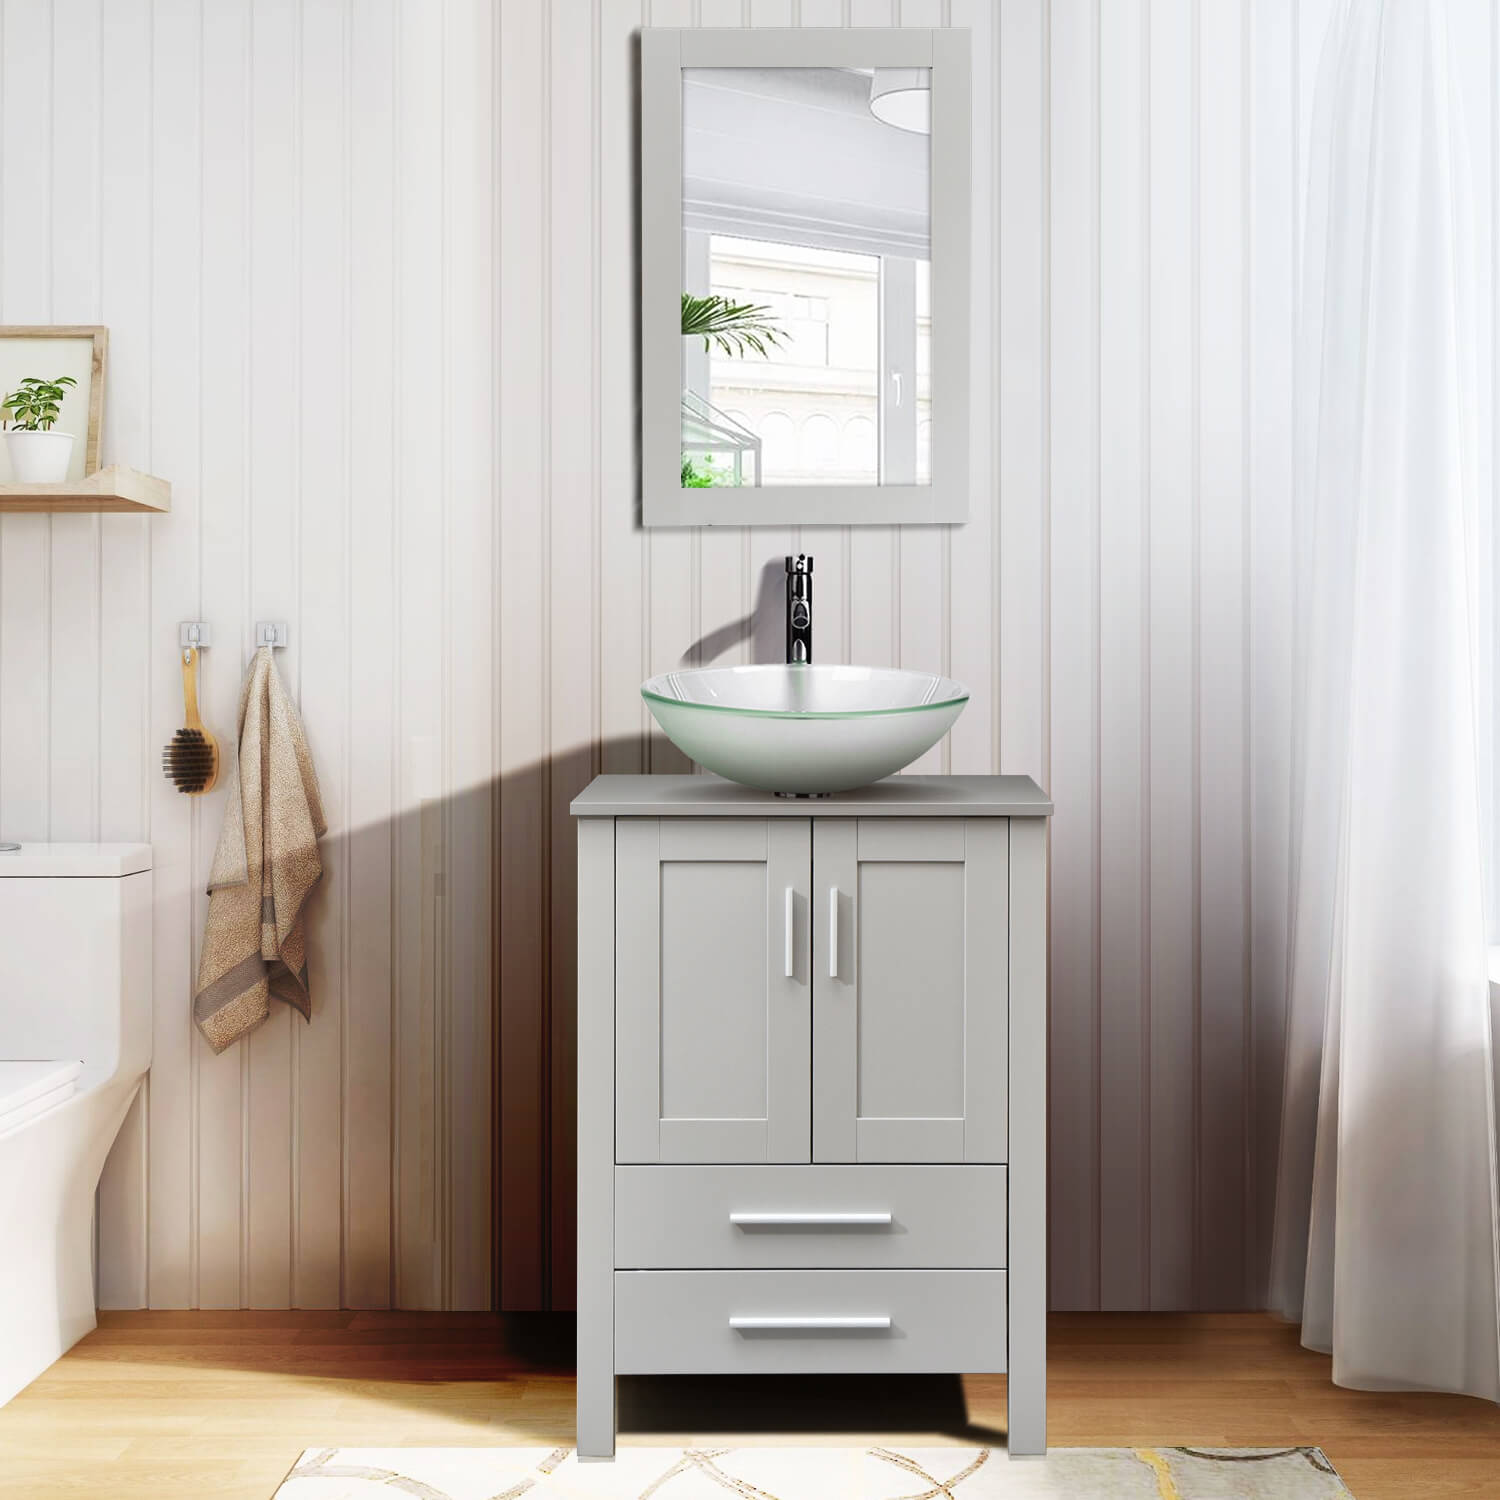 Elecwish gray wood bathroom vanity with frosted glass sink BA20103 in bathroom